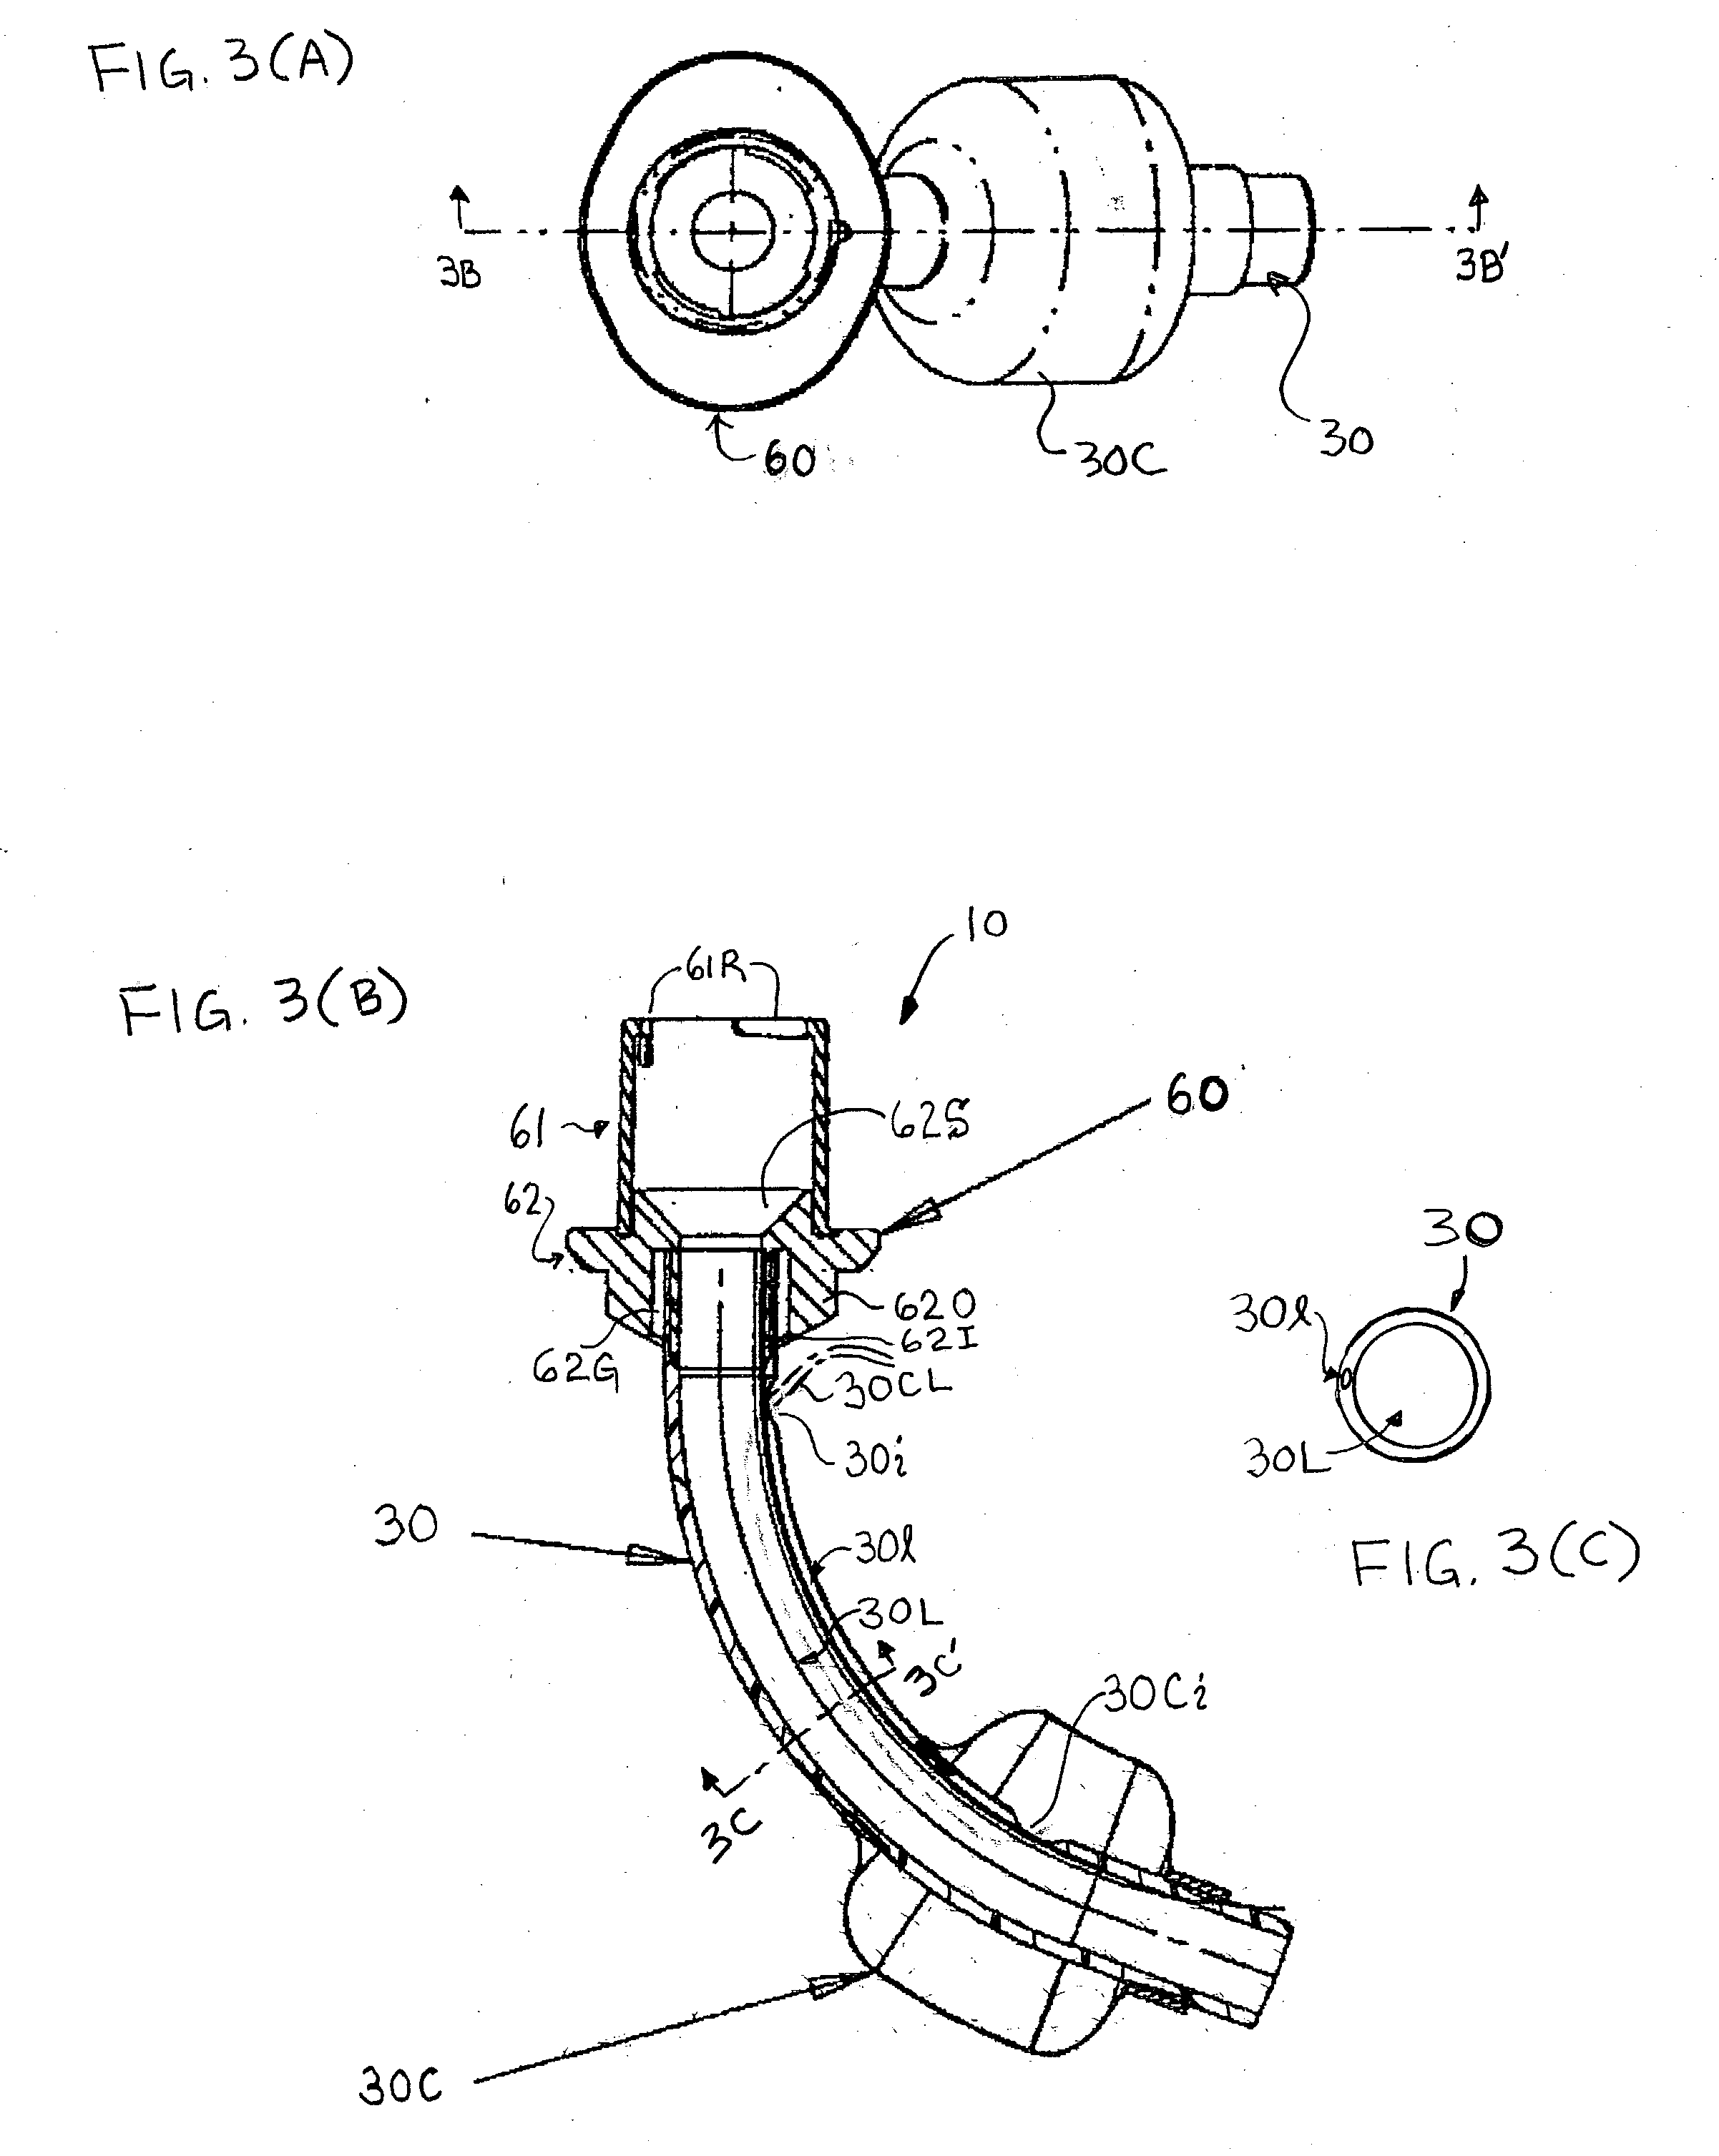 Multiple cannula systems and methods